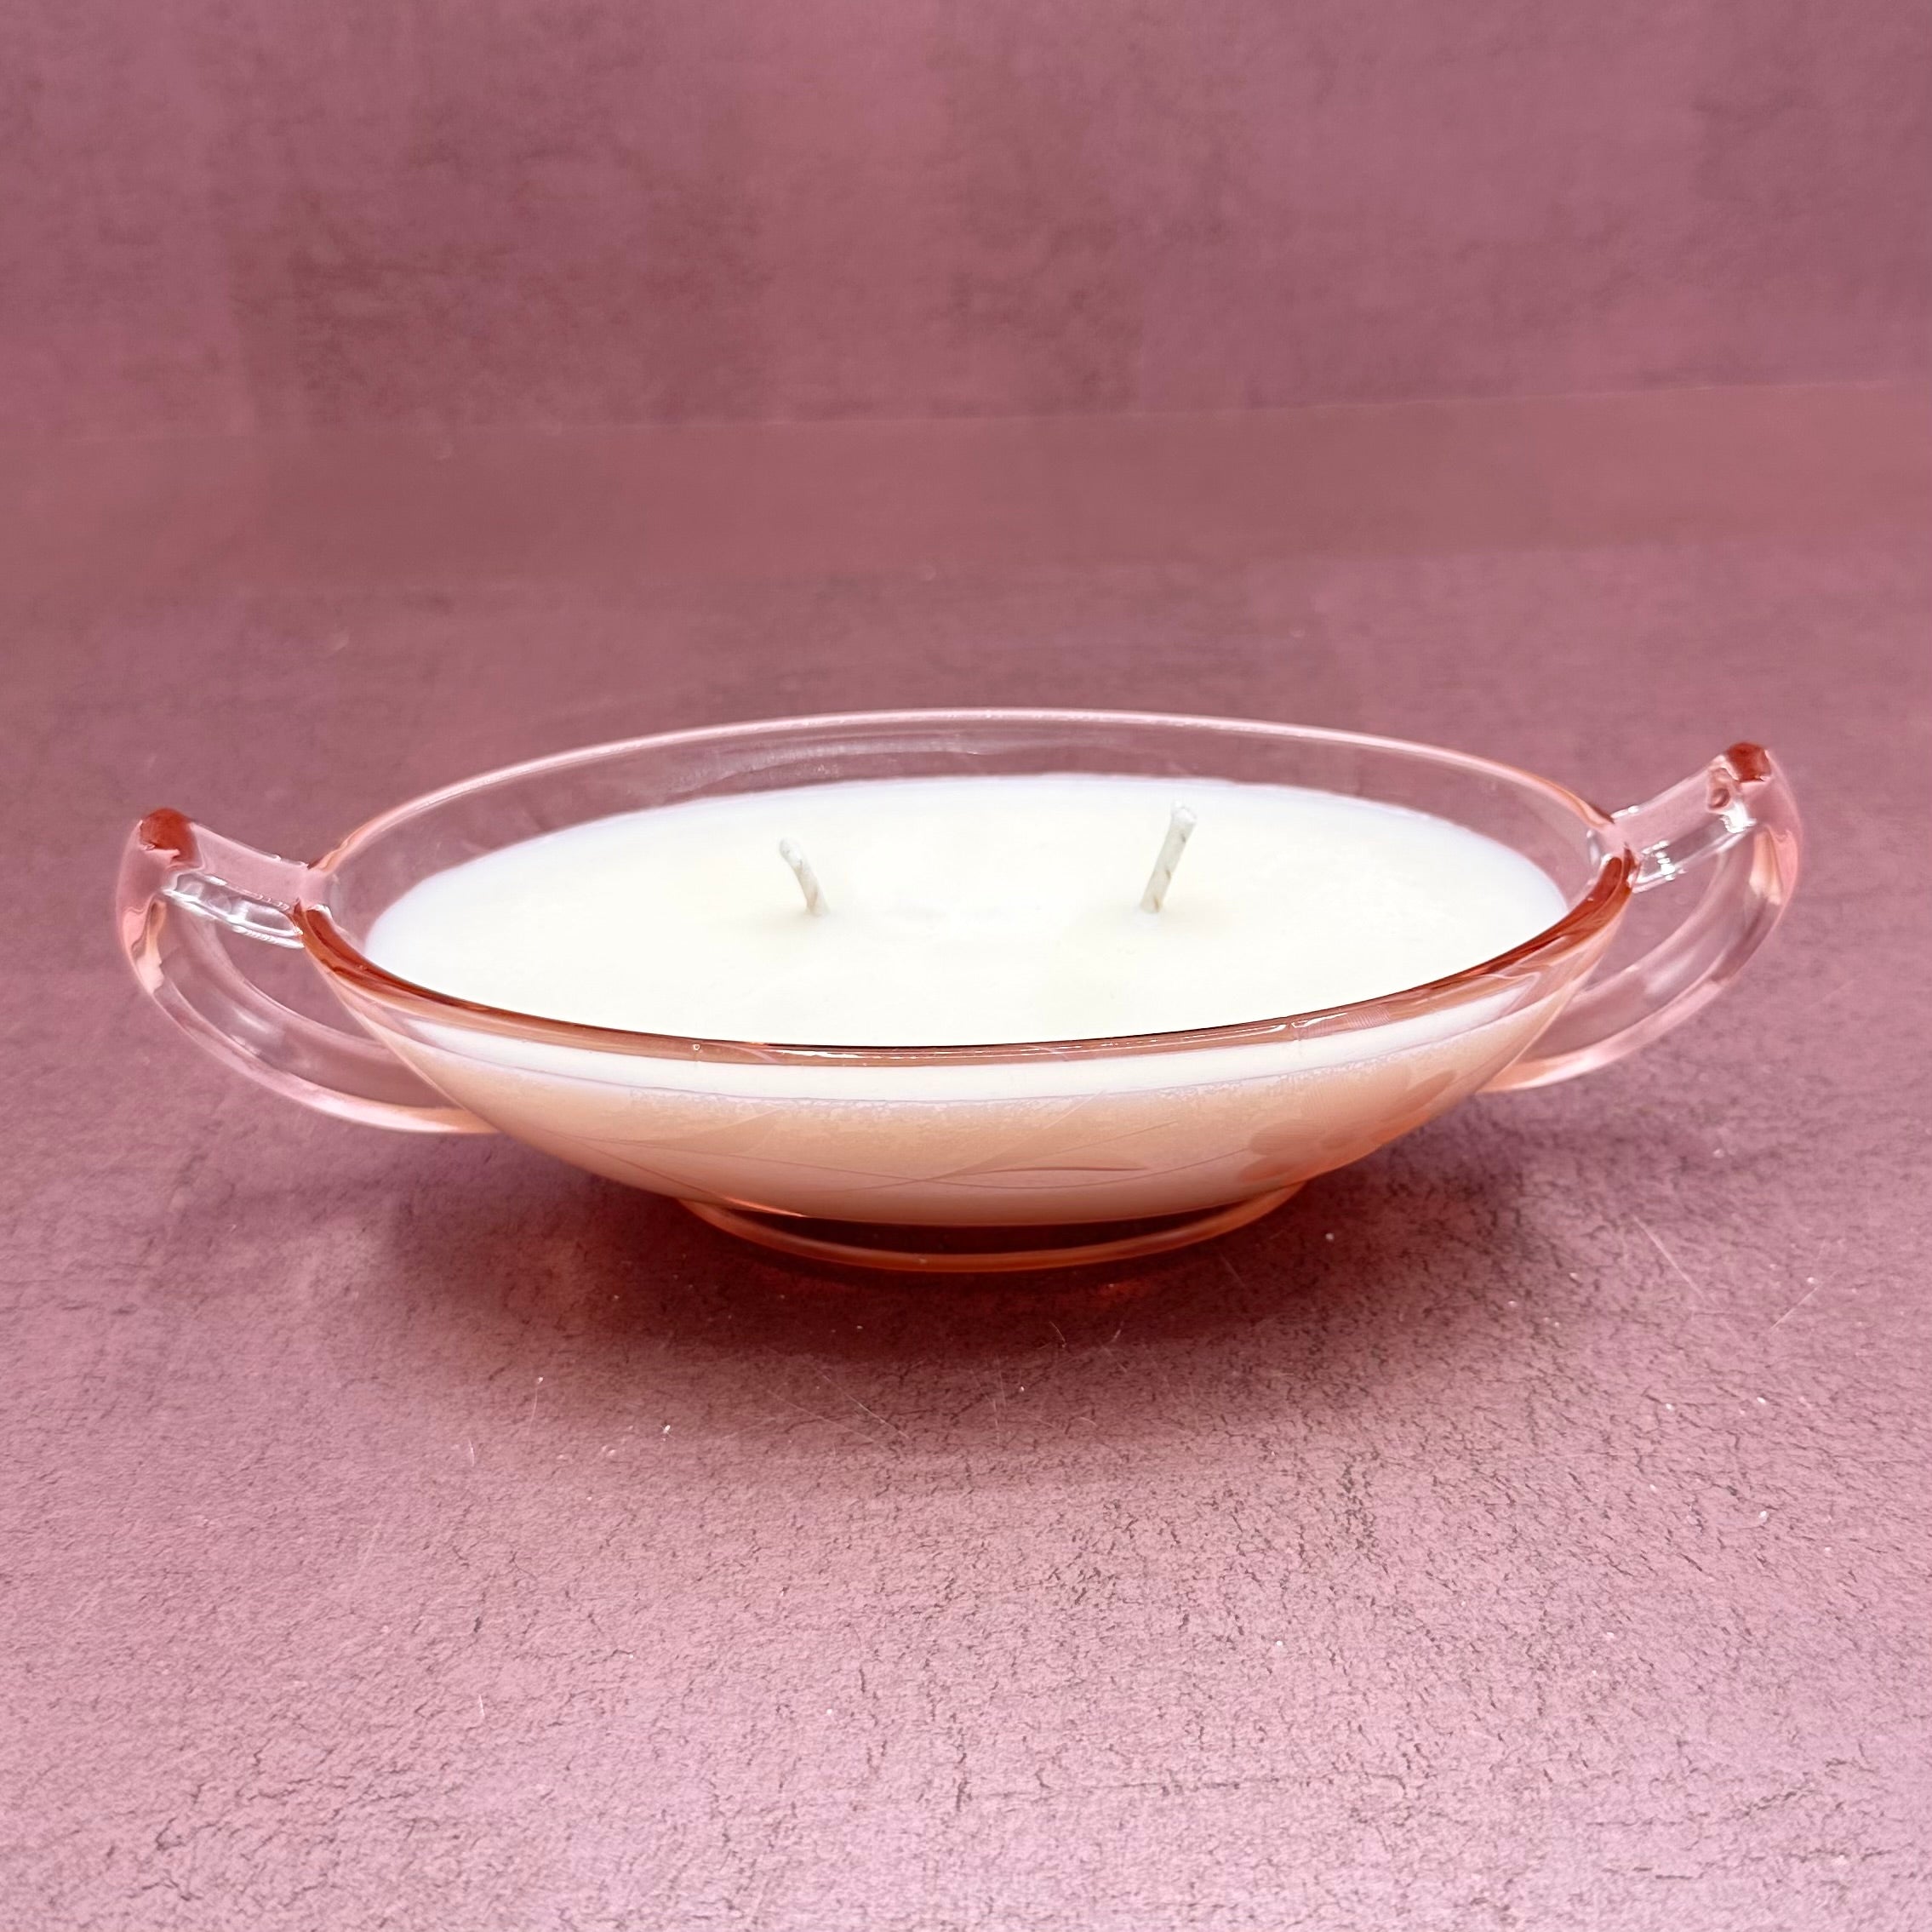 Pink Depression Glass Bowl w/ Handles Candle